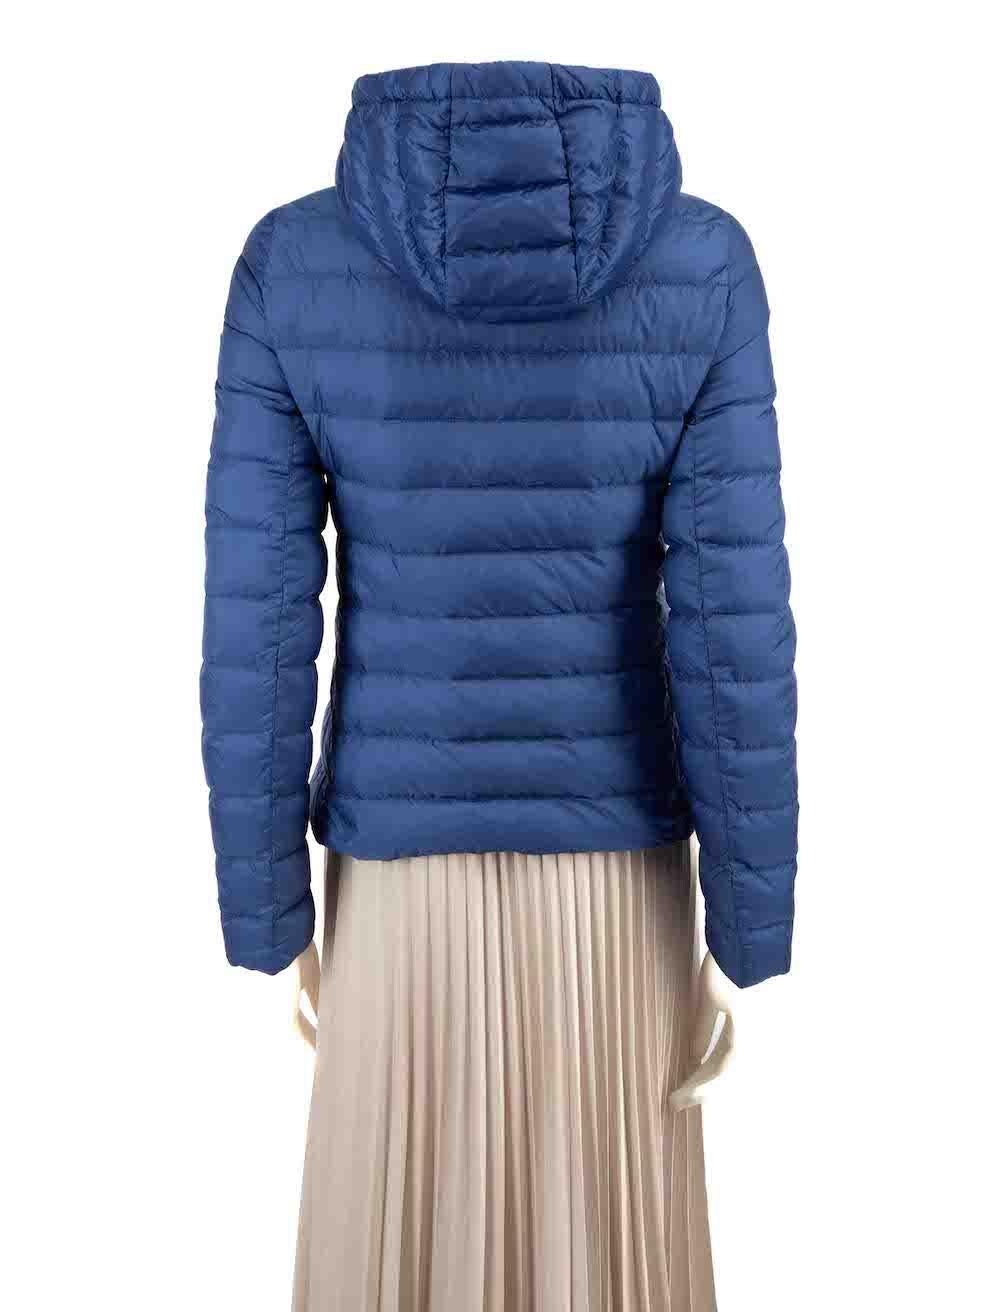 Moncler Blue Seoul Longue Saison Down Jacket Size M In Good Condition For Sale In London, GB